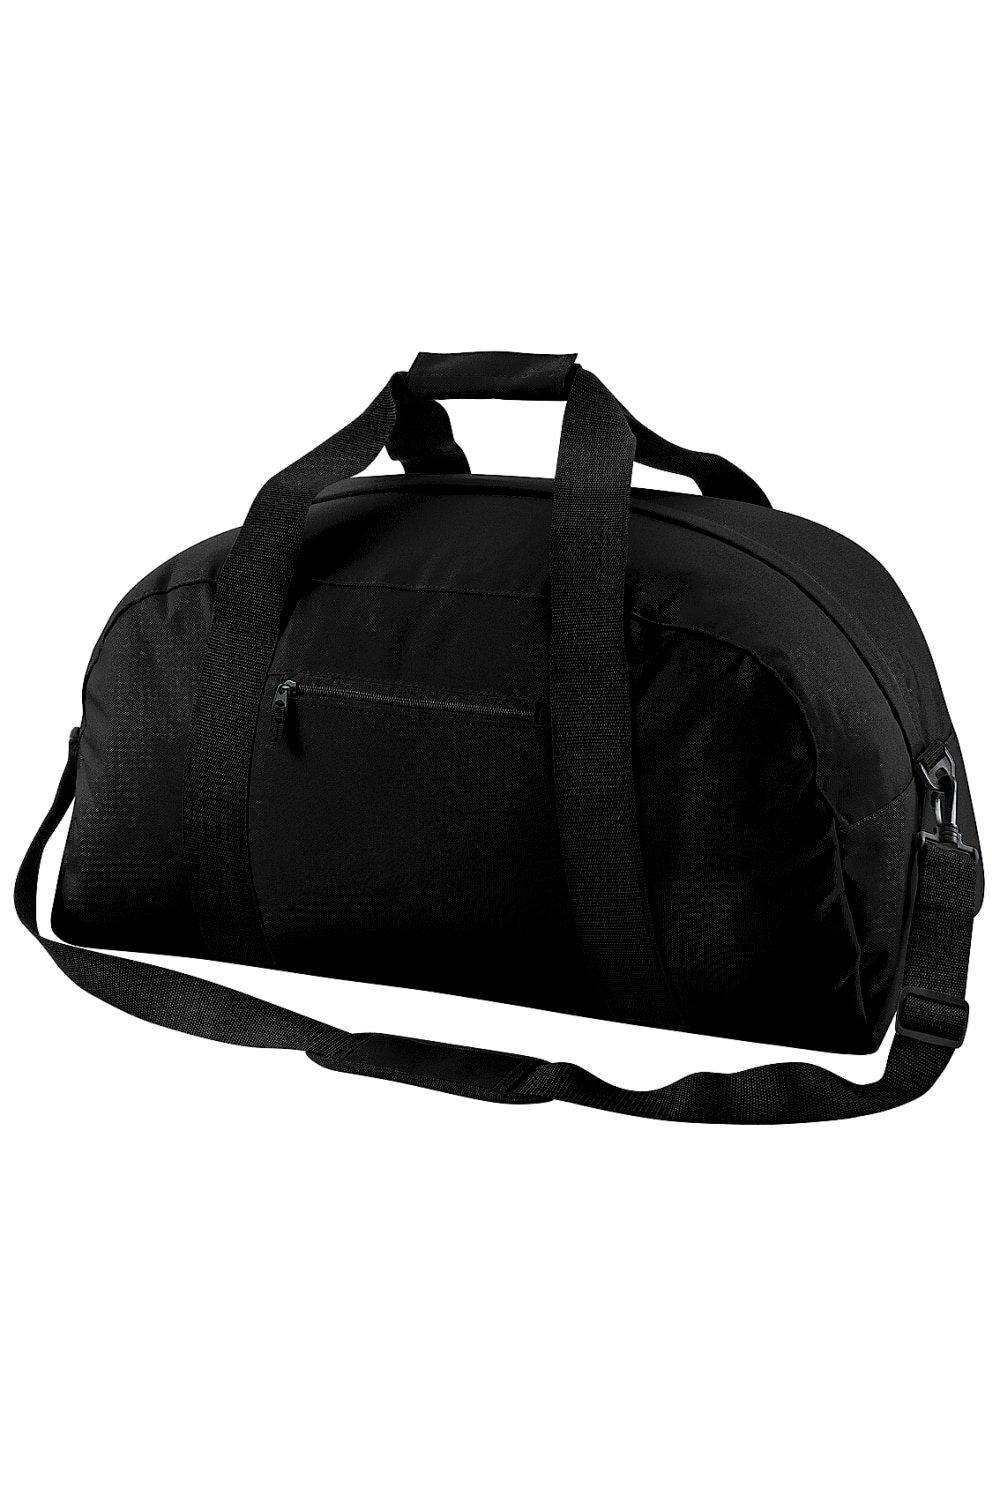 Classic Holdall Duffle Travel Bag Pack of 2